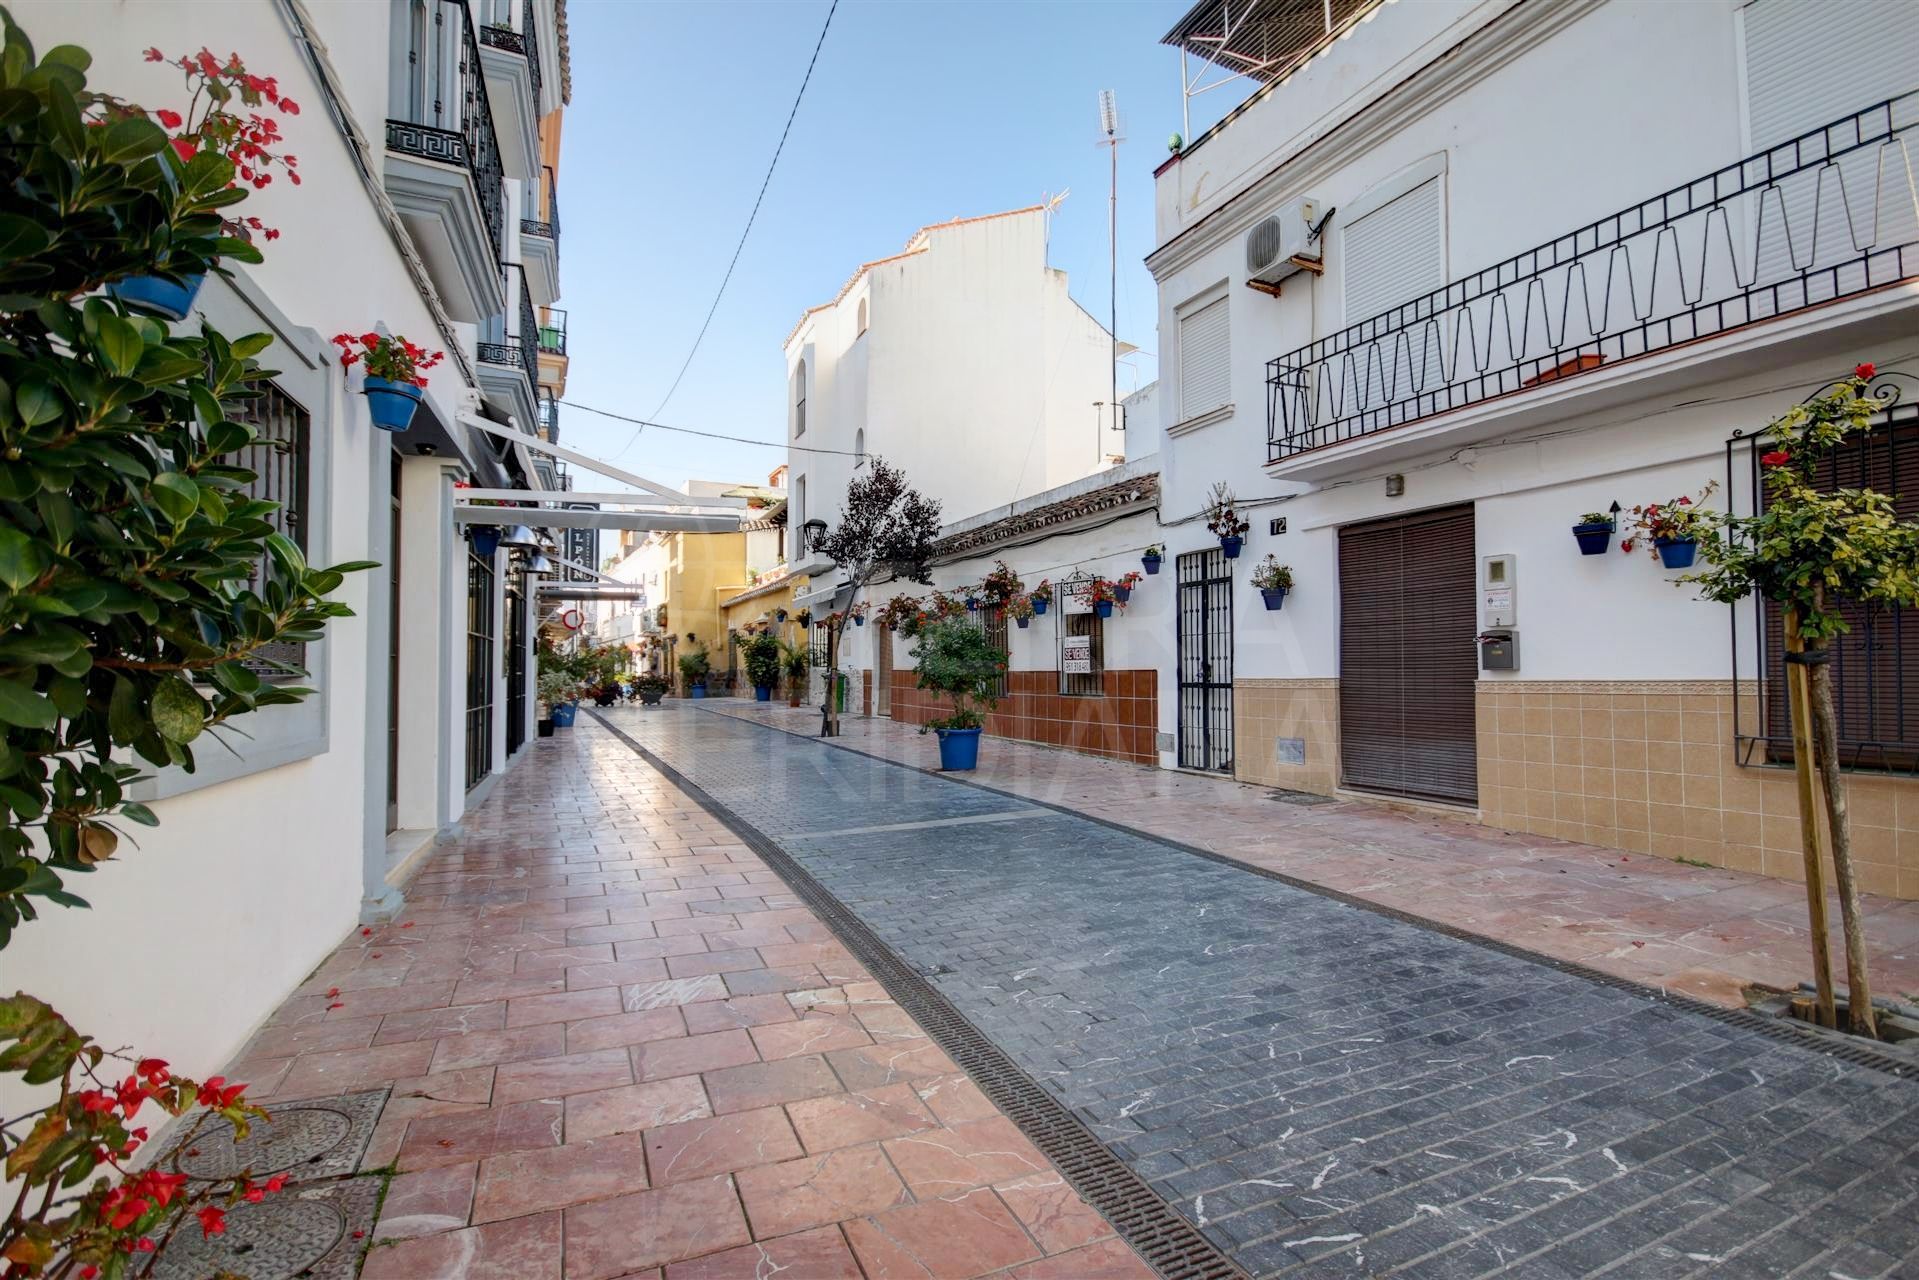 18 bedroom project for sale in Estepona old town centre, 100m to the beach